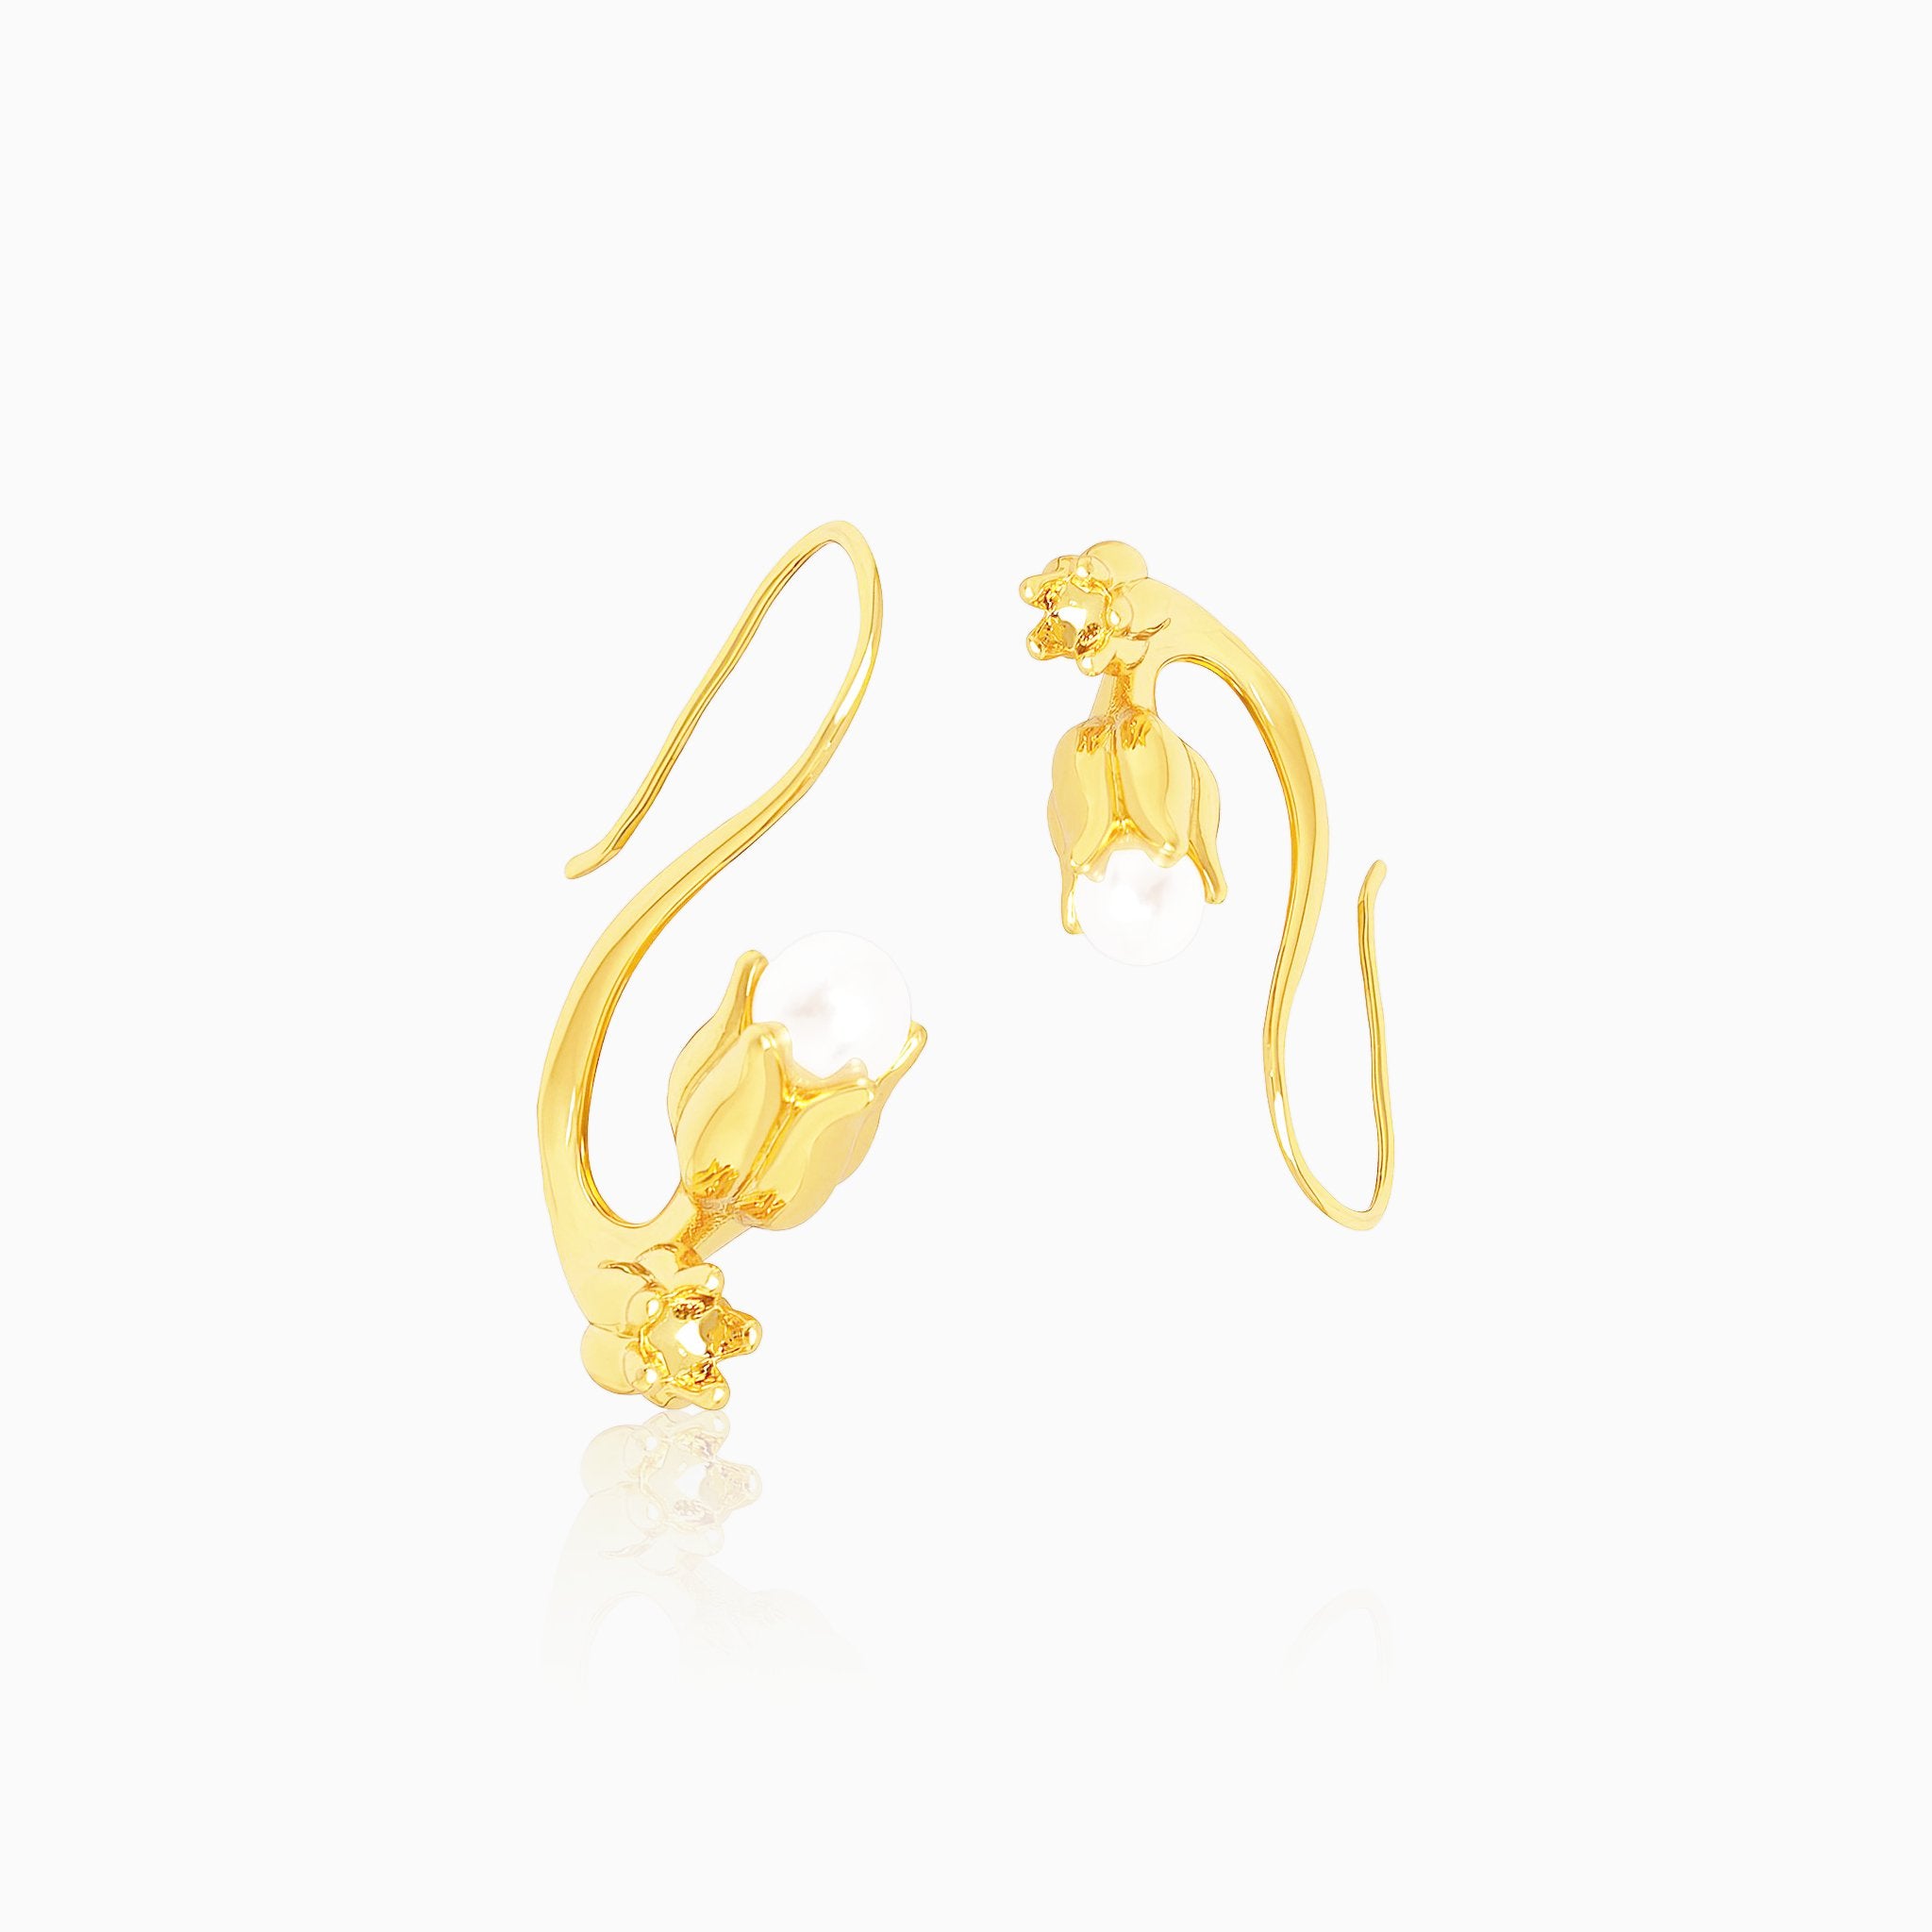 Tulip & Pearl Earrings - Nobbier - Earring - 18K Gold And Titanium PVD Coated Jewelry